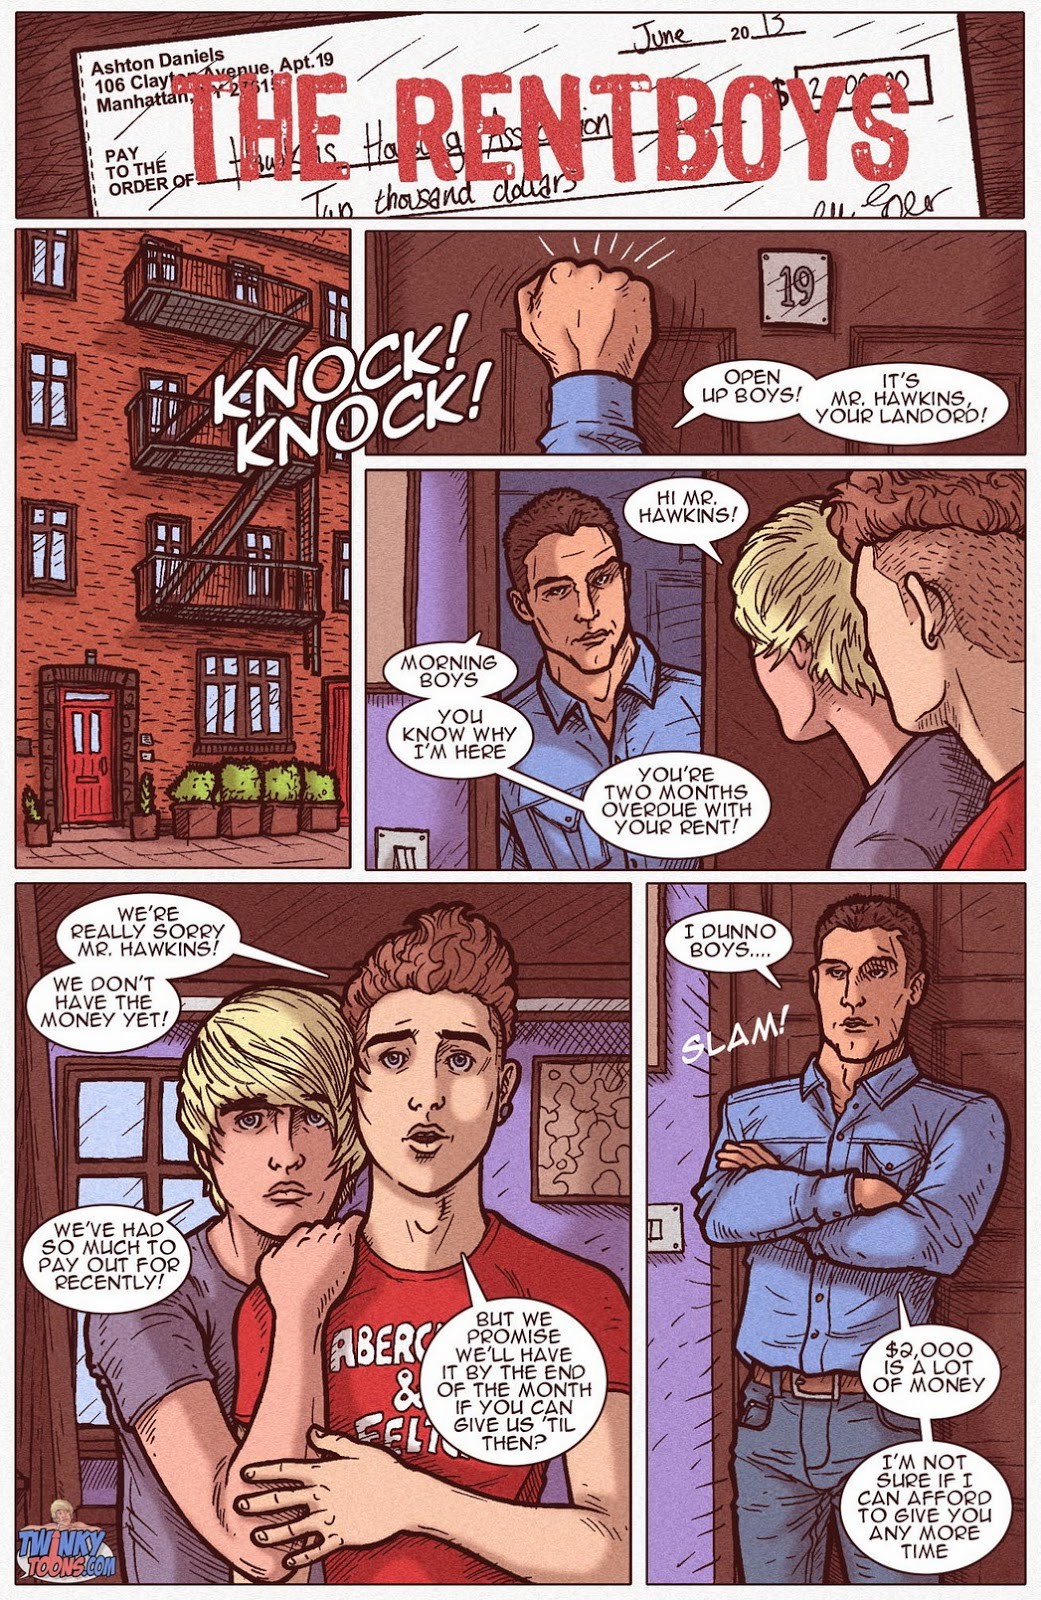 Zumbabuyas The Rent Boys 0001comic014 the rentboys 01